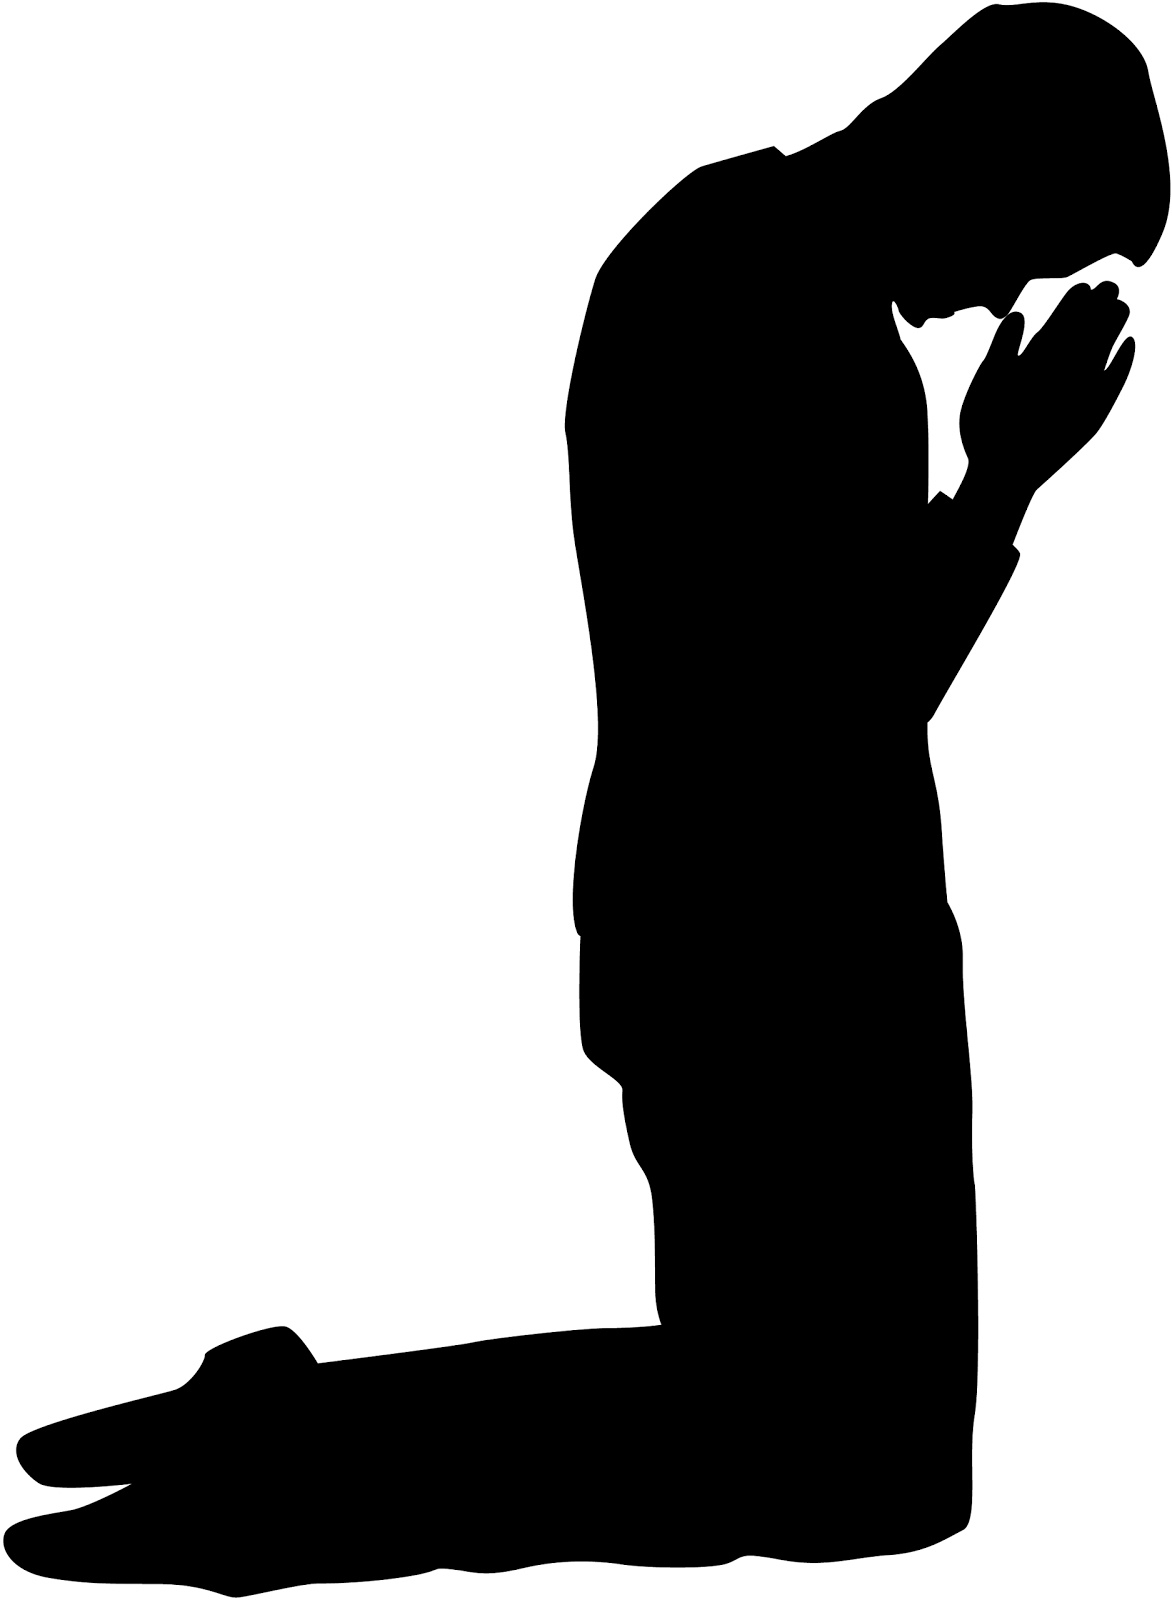 Image Of Black Woman Praying - ClipArt Best